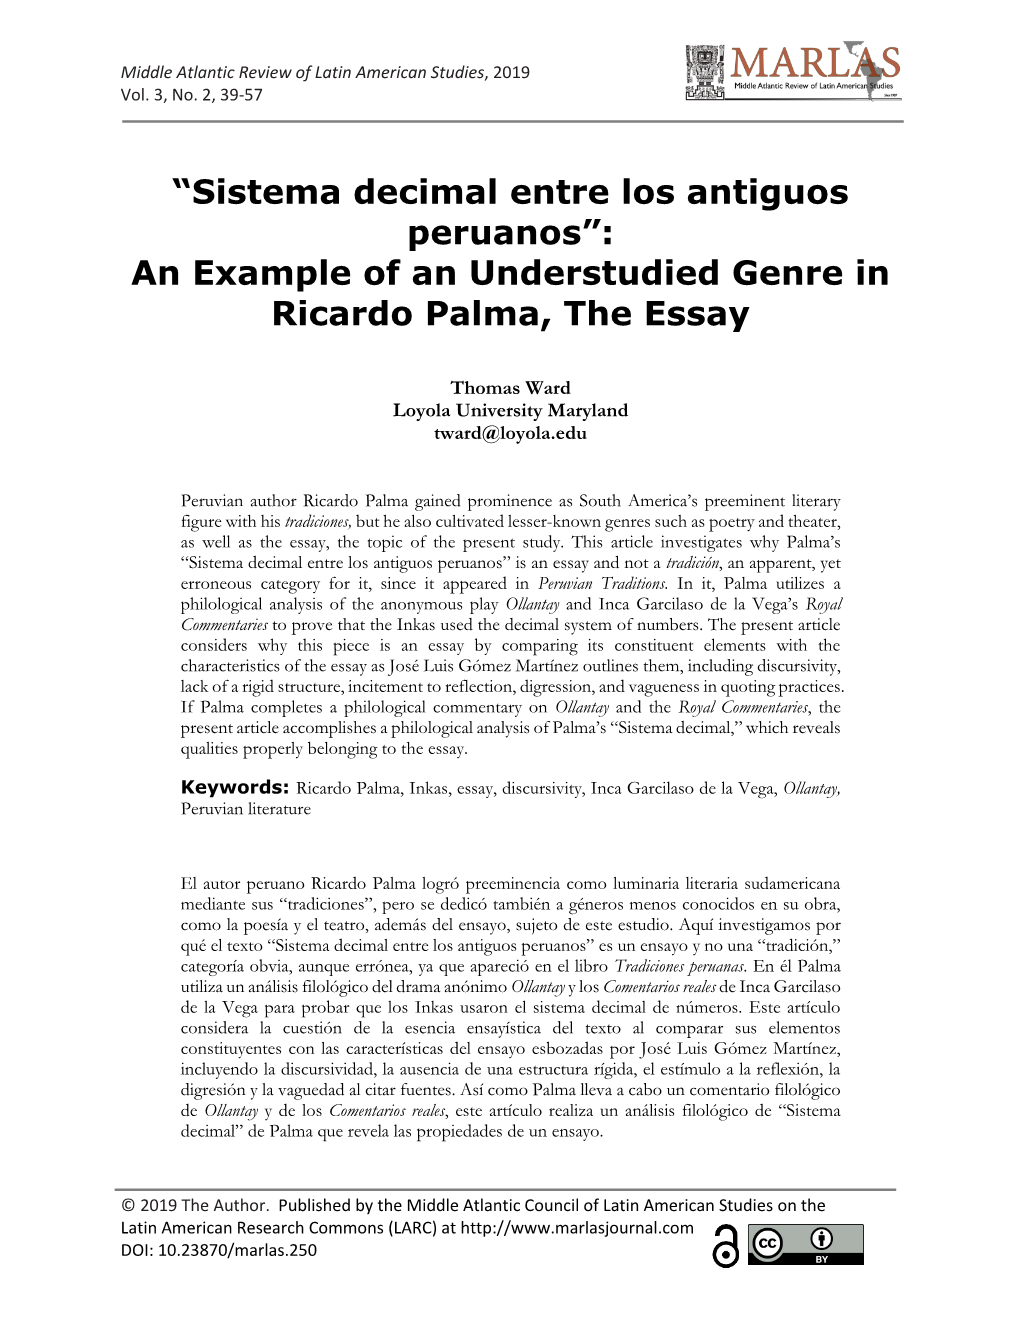 An Example of an Understudied Genre in Ricardo Palma, the Essay